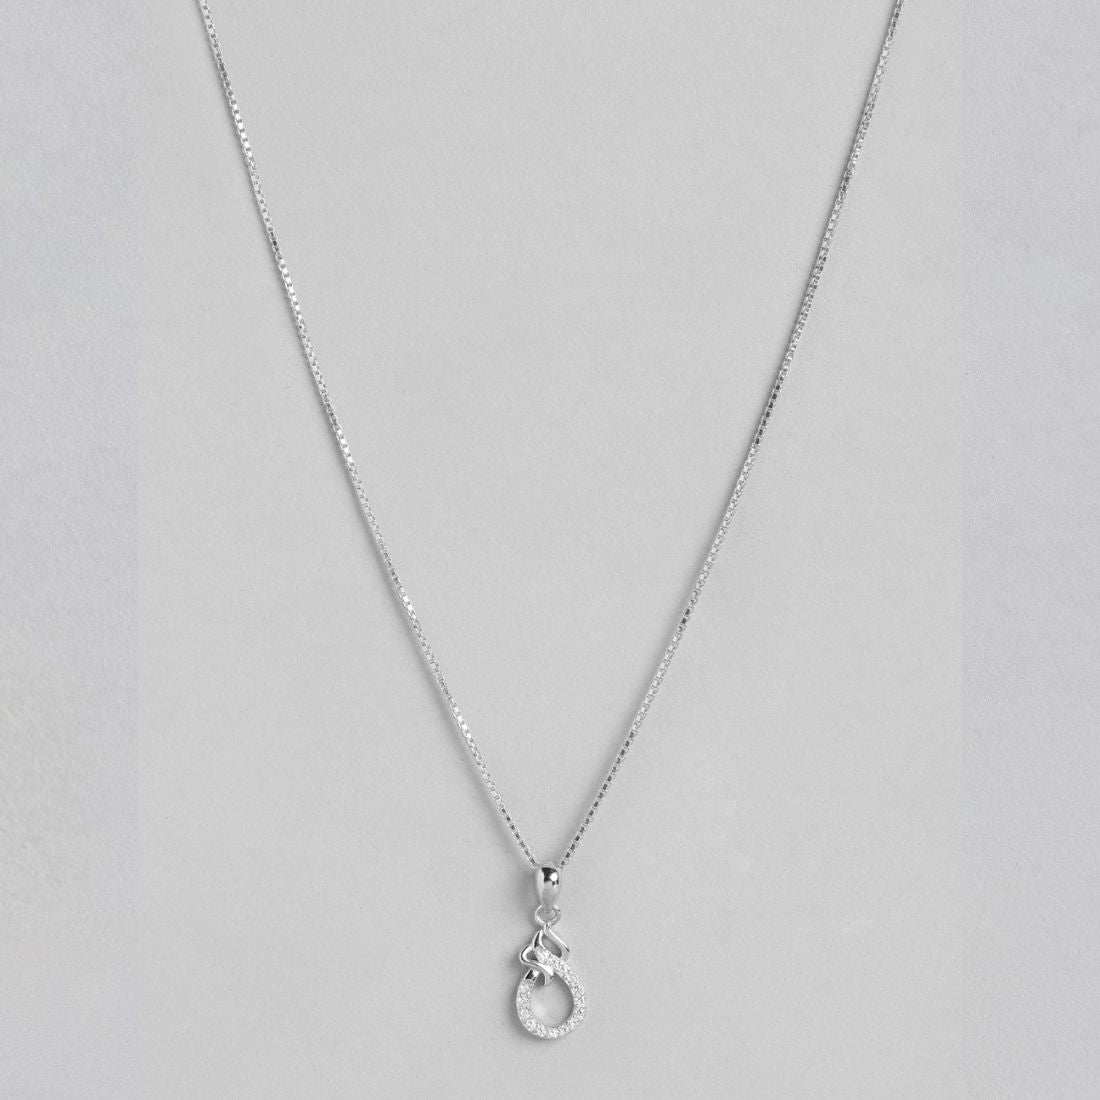 Embraced Eternal Sparkle Rhodium Plated 925 Sterling Silver Pendant with Chain